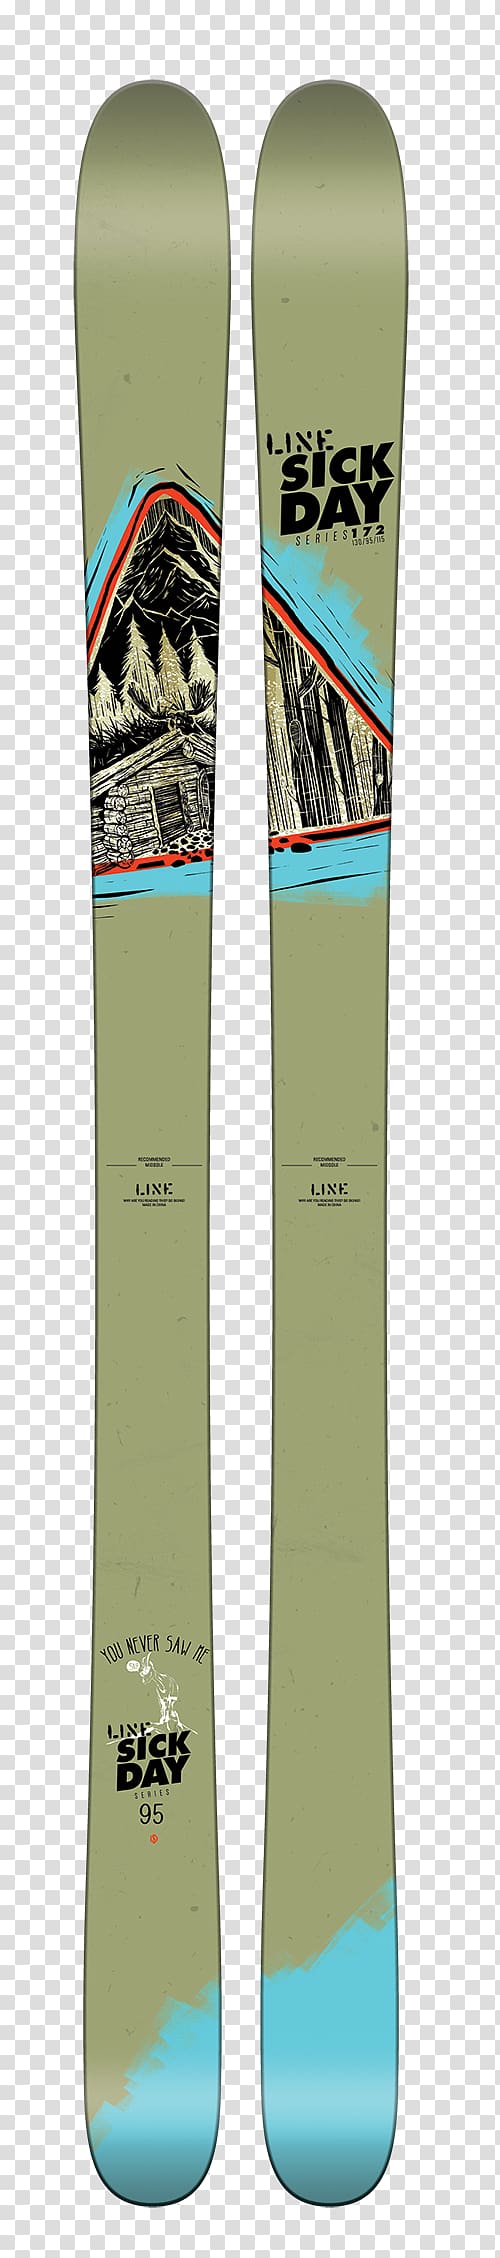 Sporting Goods Line Skis Sick Day 95 2015/16 Twin-tip ski, others transparent background PNG clipart